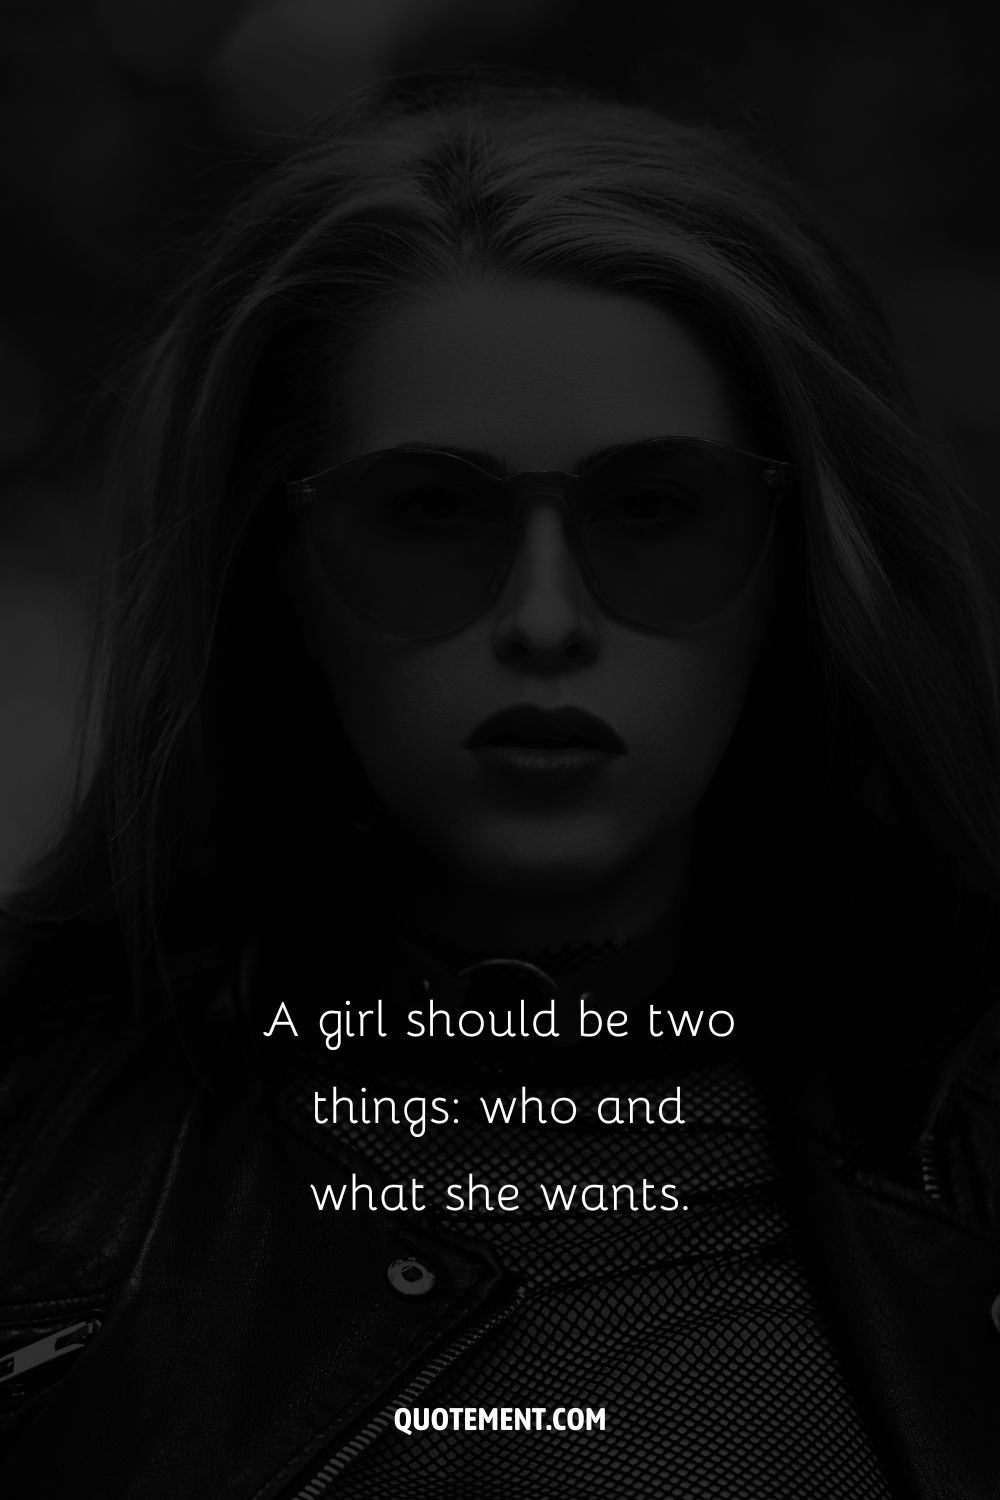 Image of a serious girl in sunglasses representing a bad bitch Instagram caption.